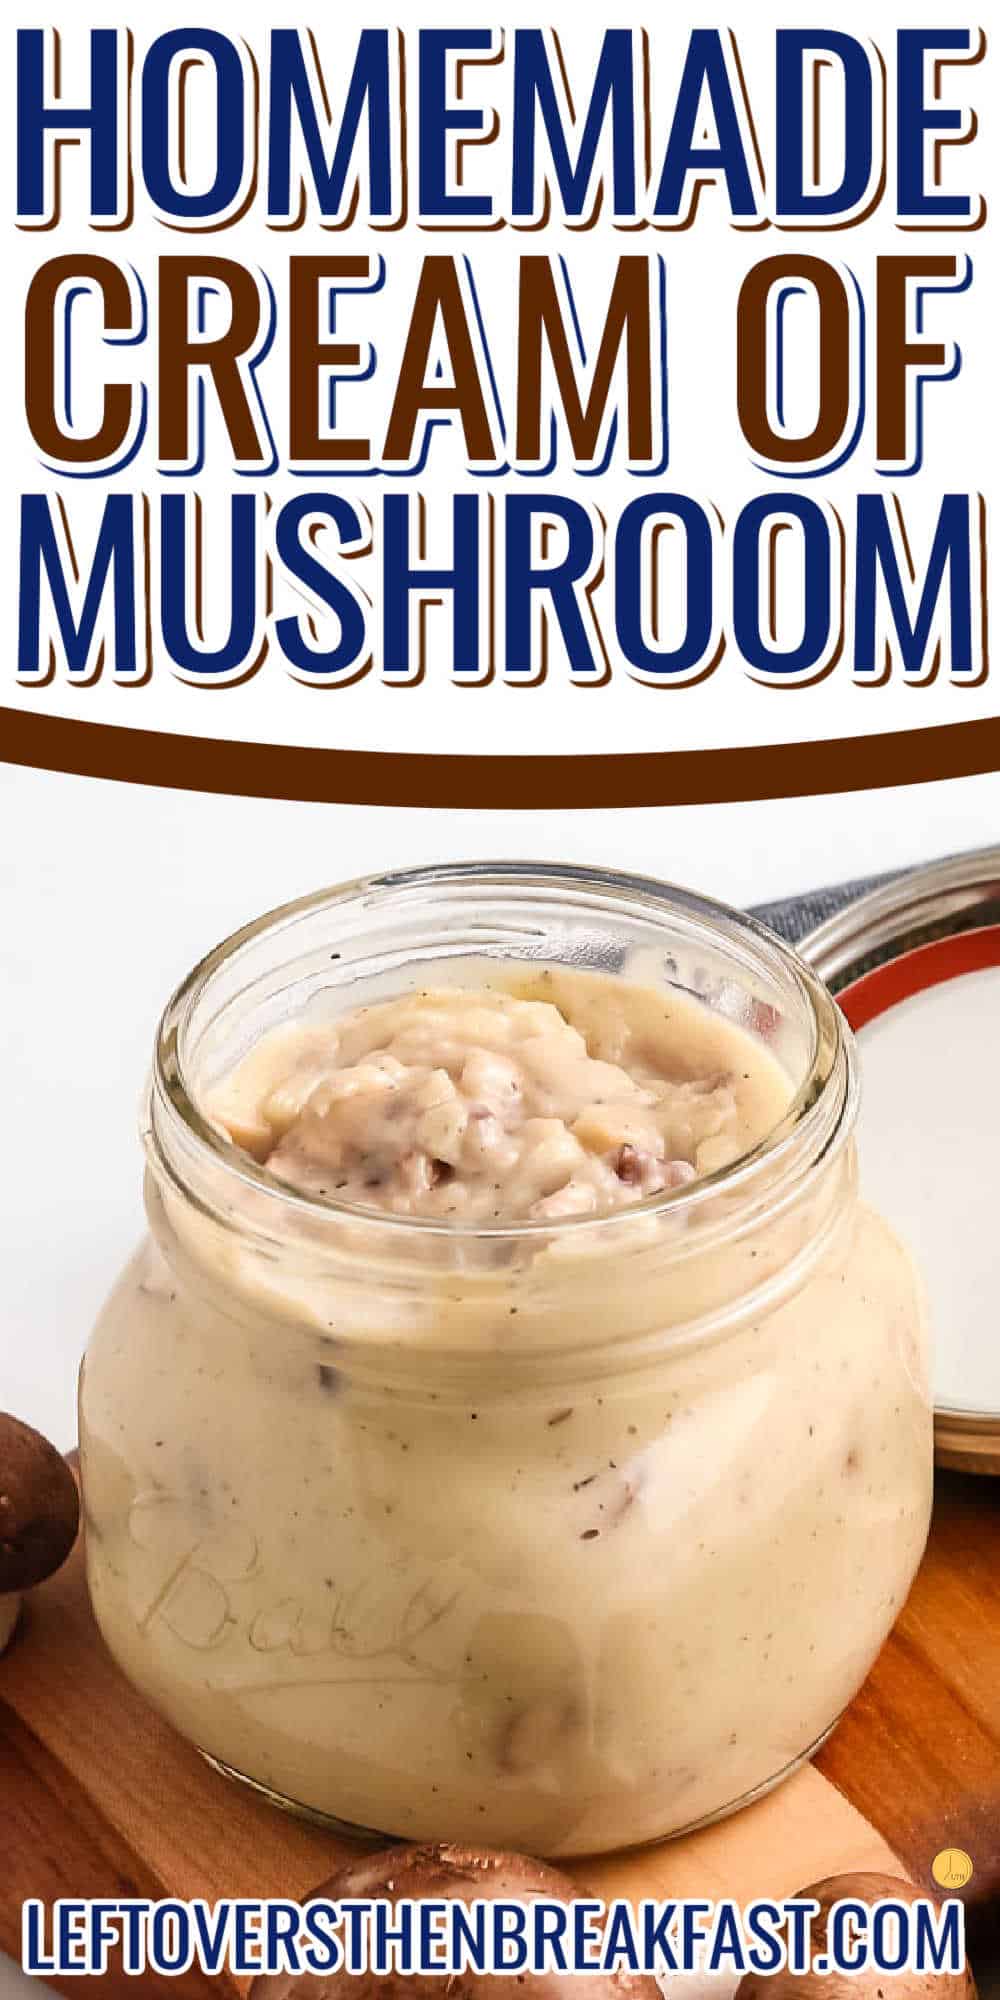 jar of soup with text "homemade cream of mushroom soup"